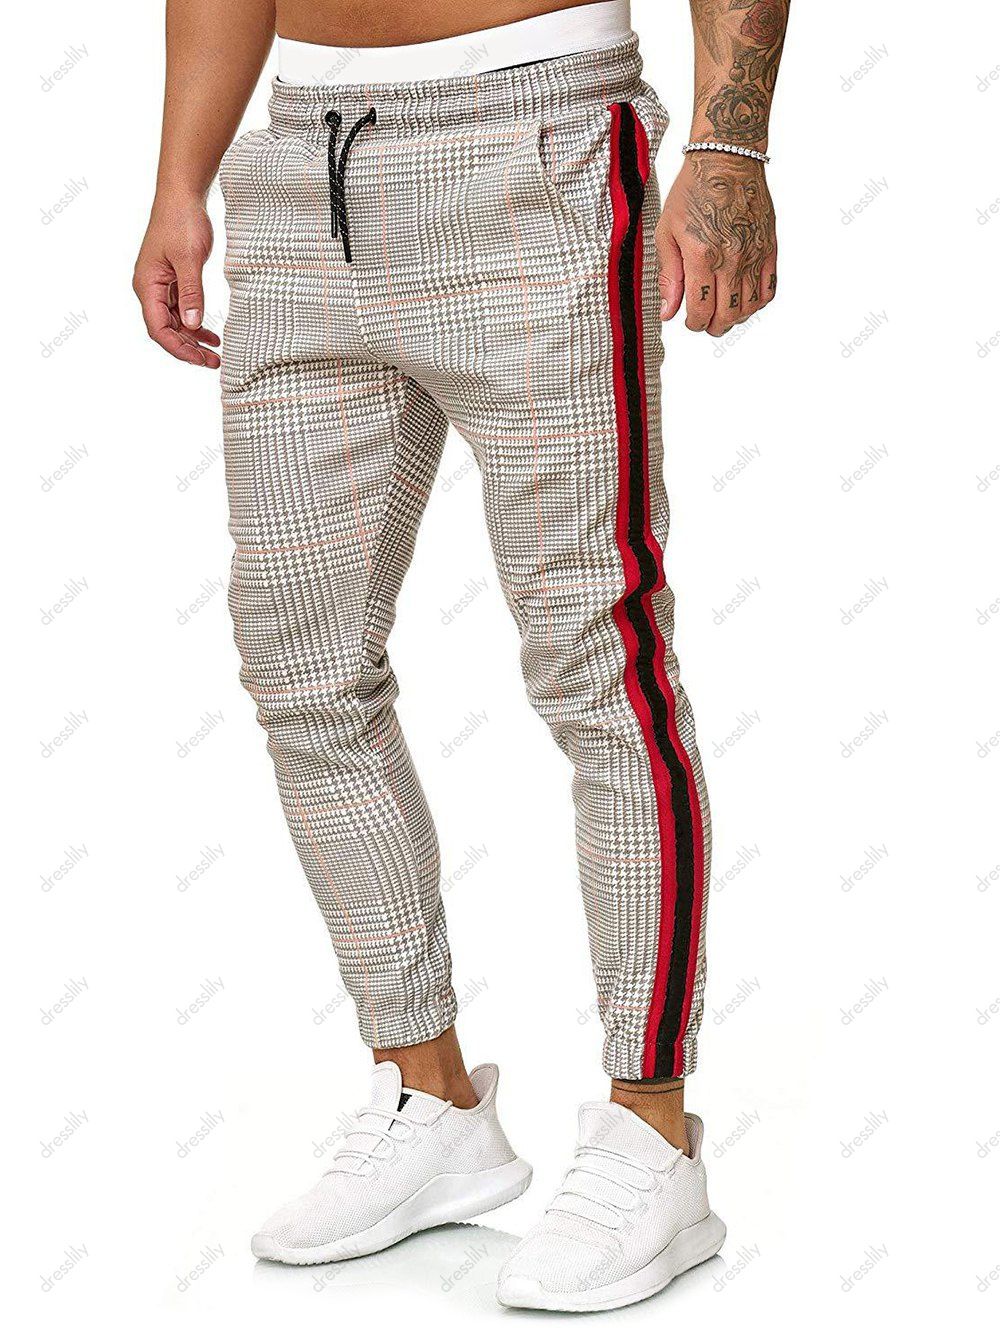 [36% OFF] 2020 Houndstooth Print Side Stripe Jogger Pants In Multicolor ...